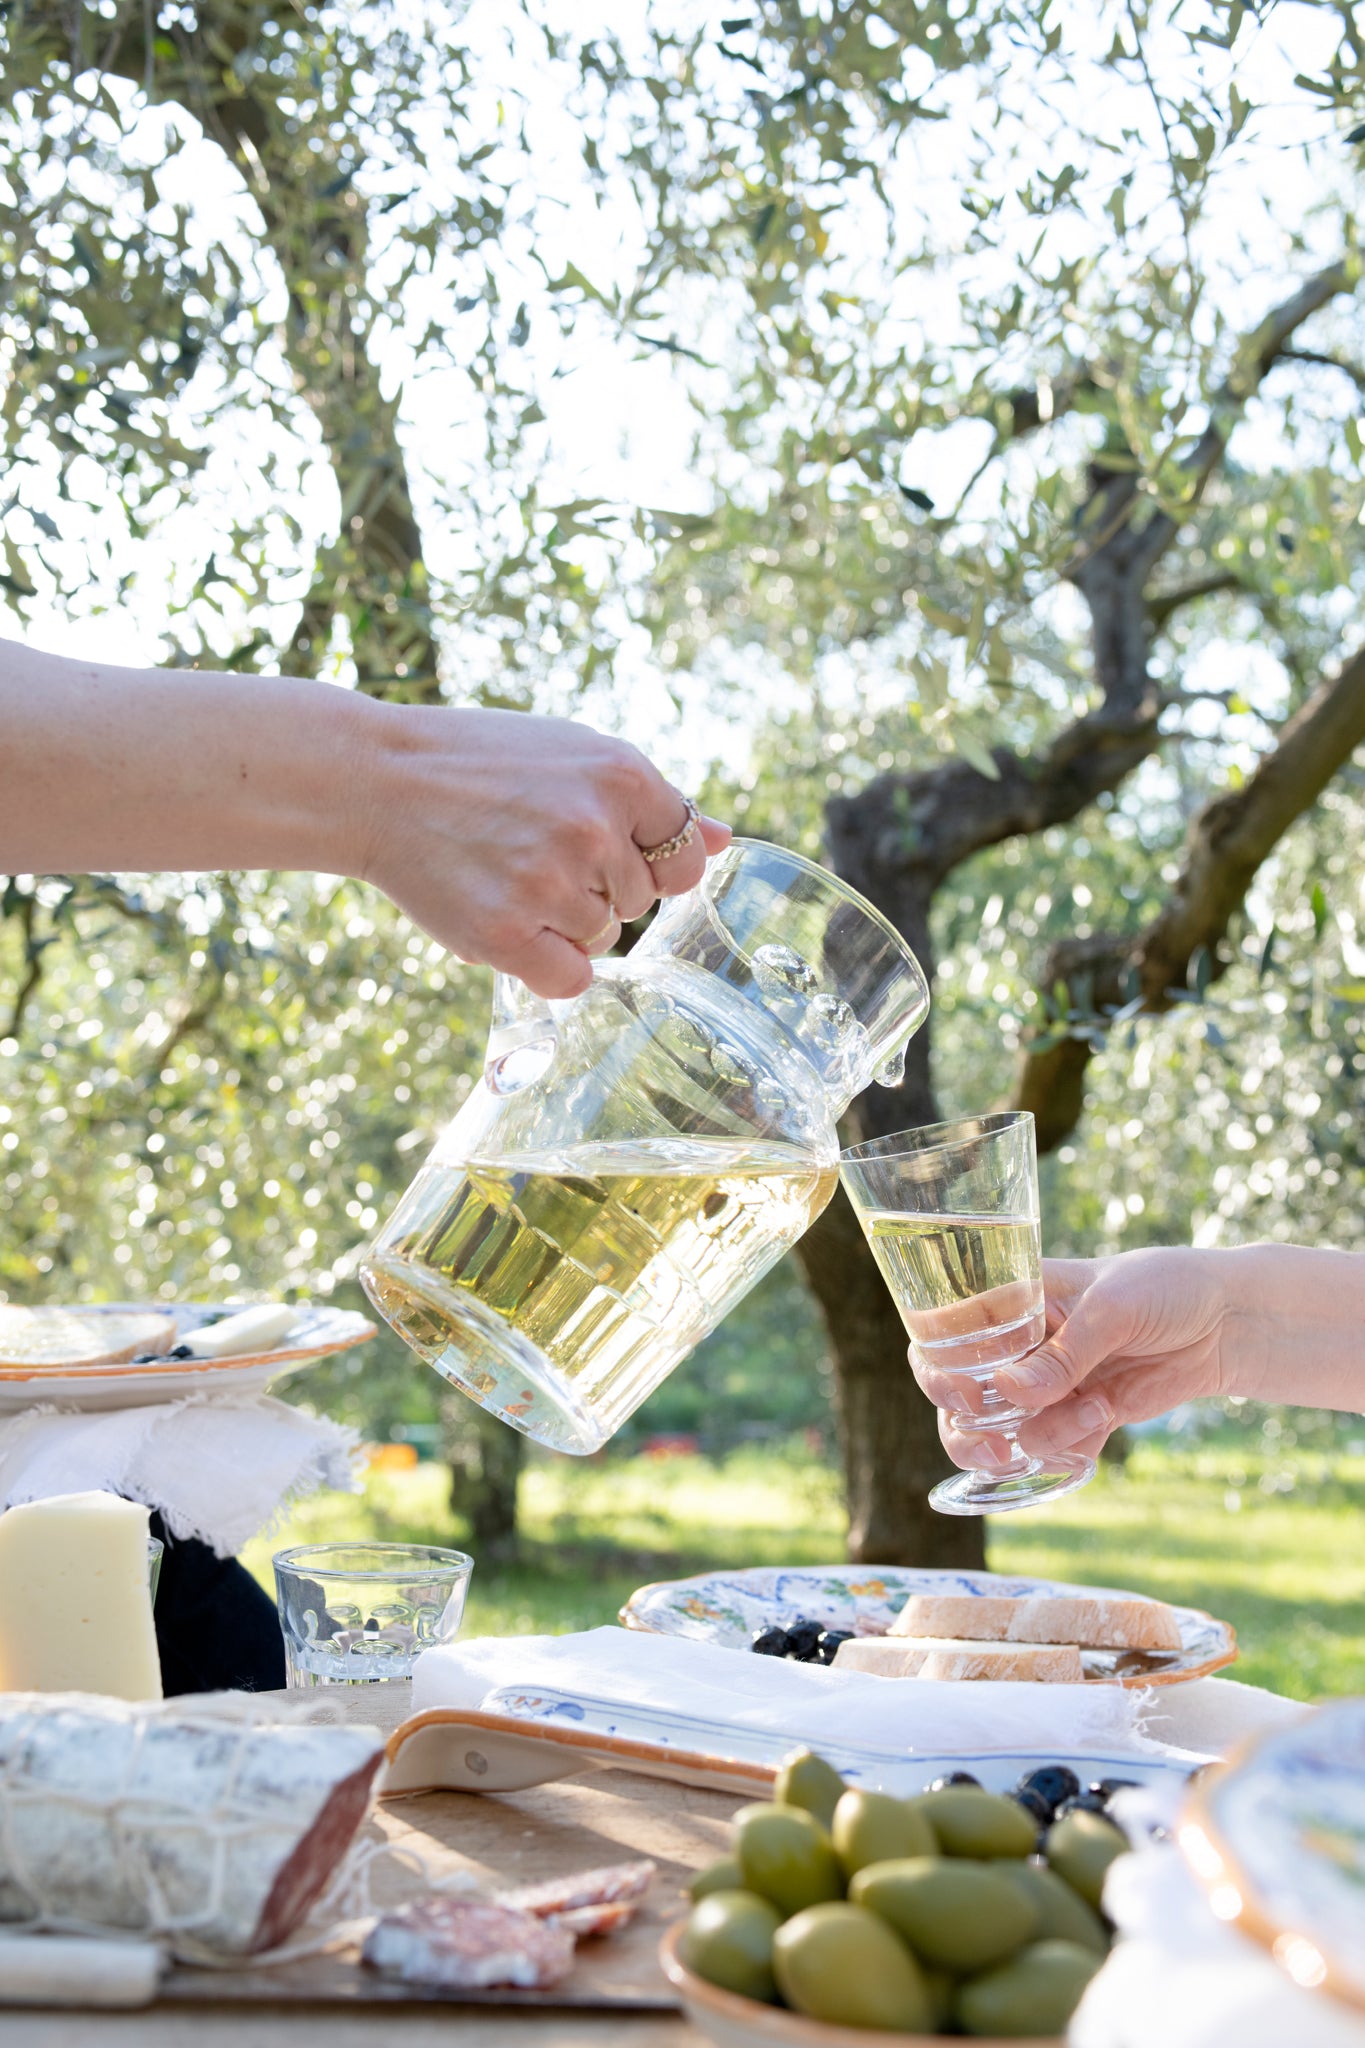 table olives aperitivo appetizers plates ceramics artisan countryside olive grove carafe glass white wine